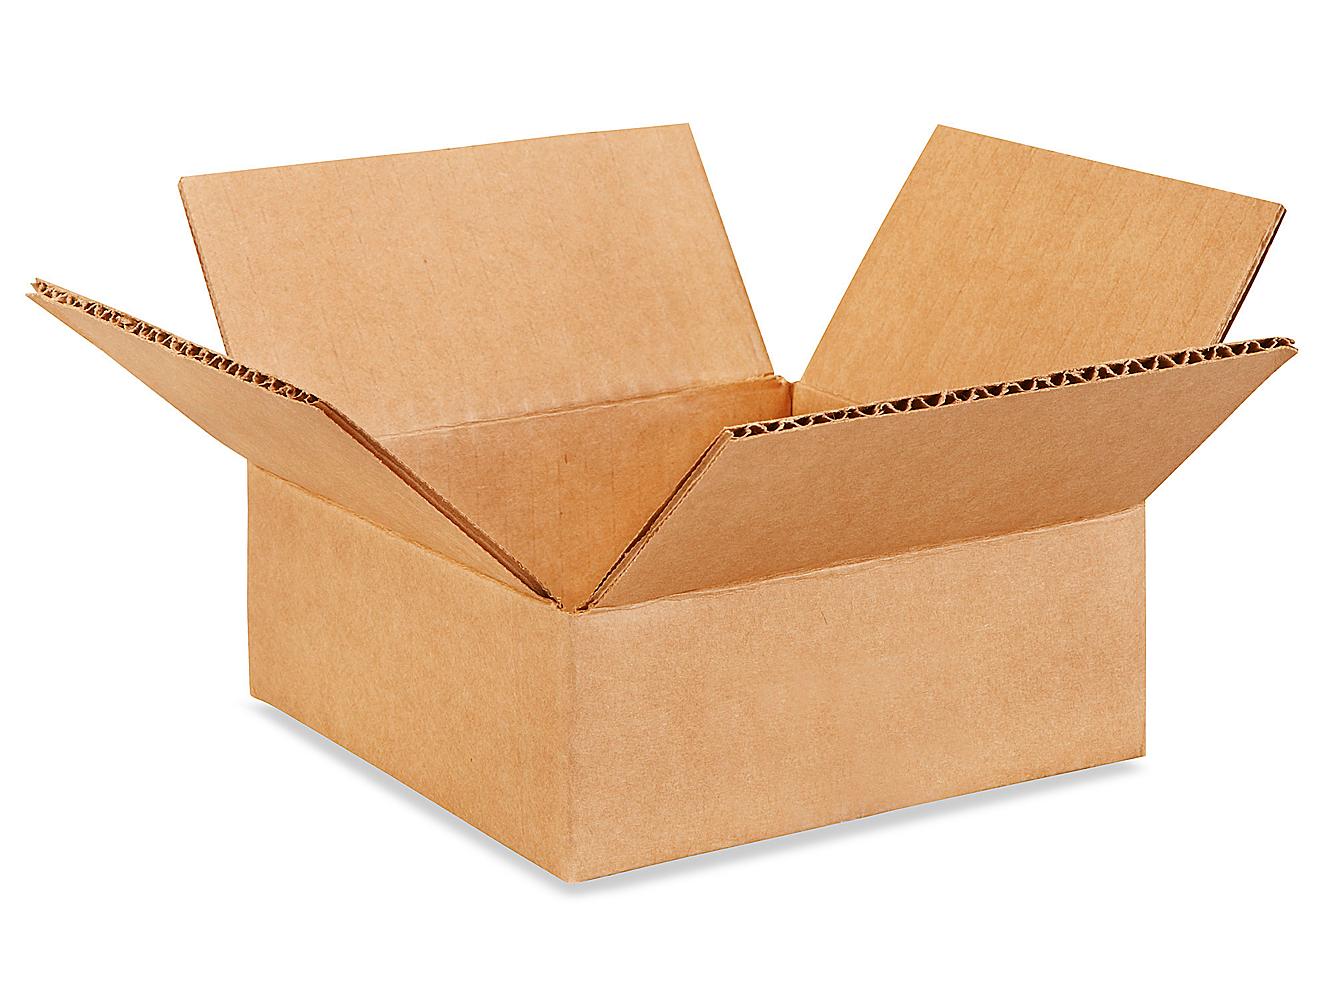 Fast Shipping 25-6 x 6 x 2" Corrugated Boxes 